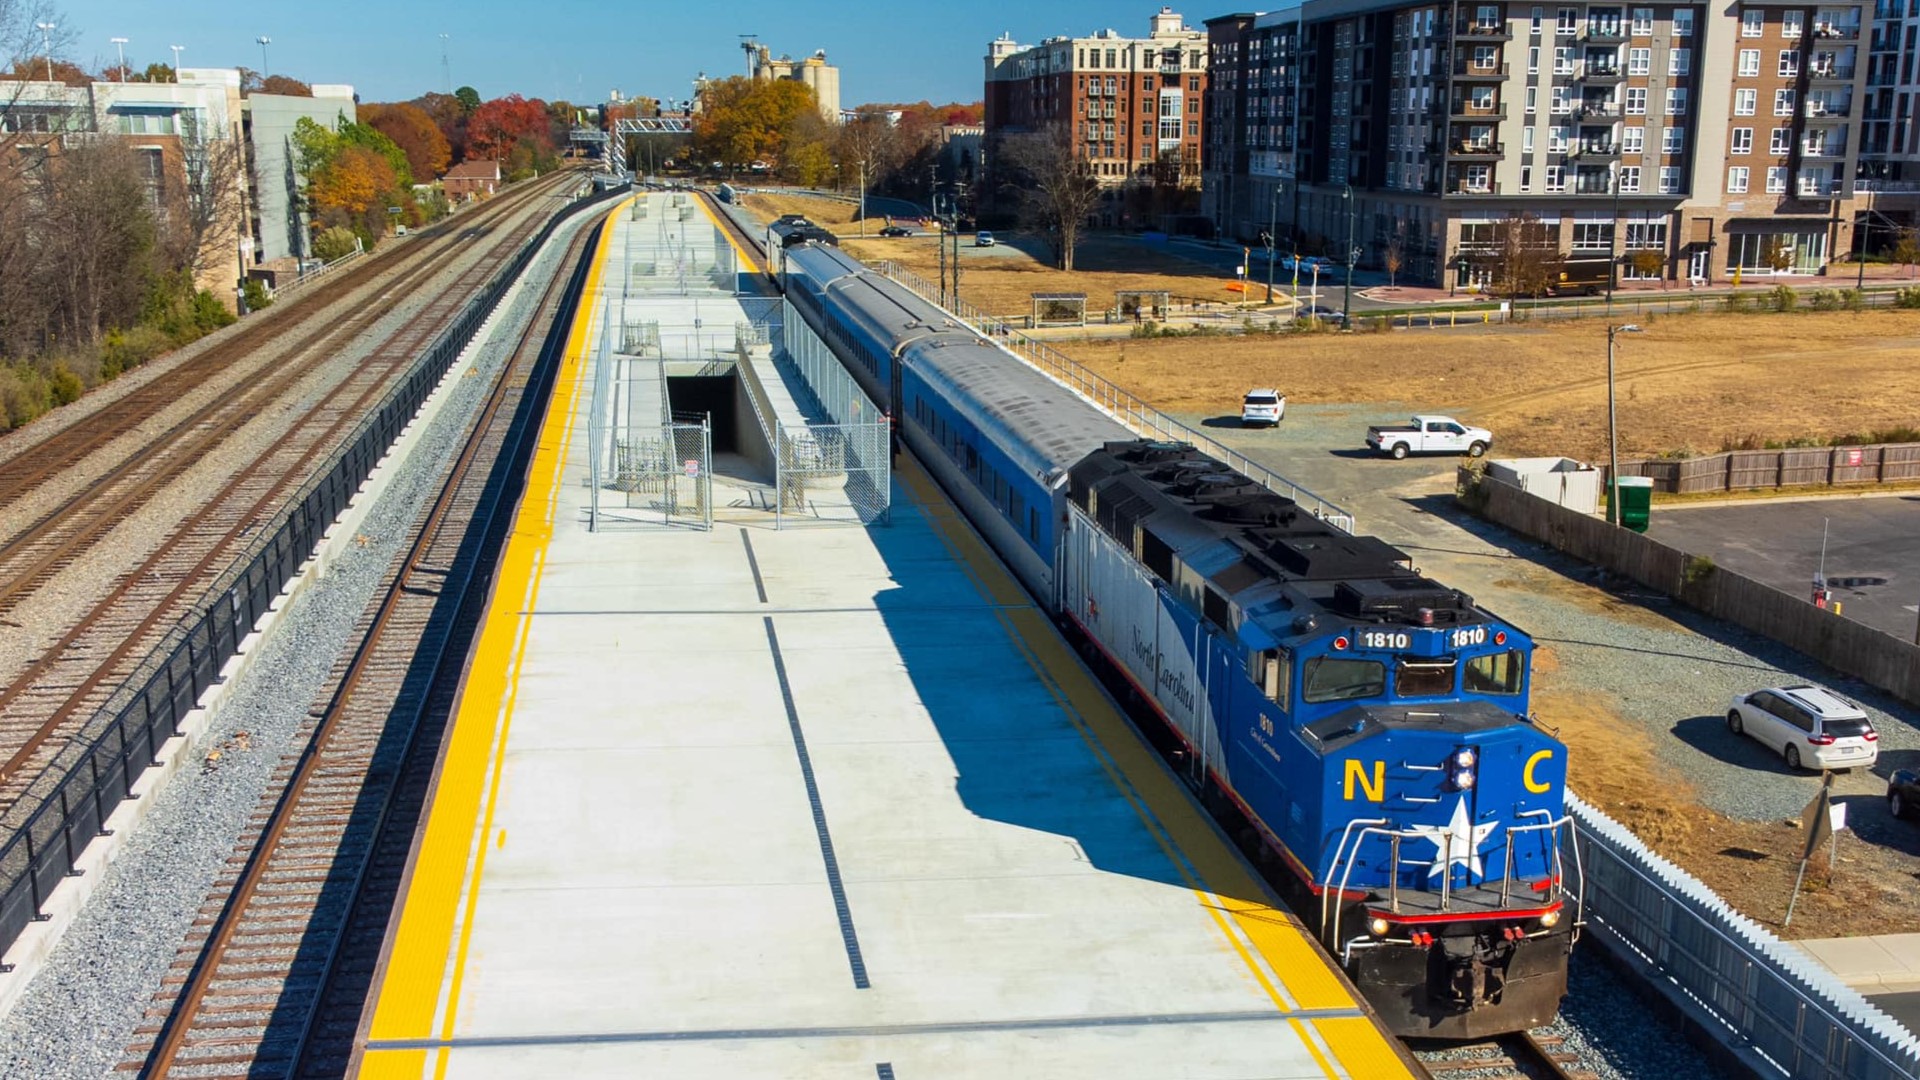 Gateway Station will offer Charlotte passengers direct access to Uptown Charlotte, the Lynx Gold Line, and connecting CATS bus routes.